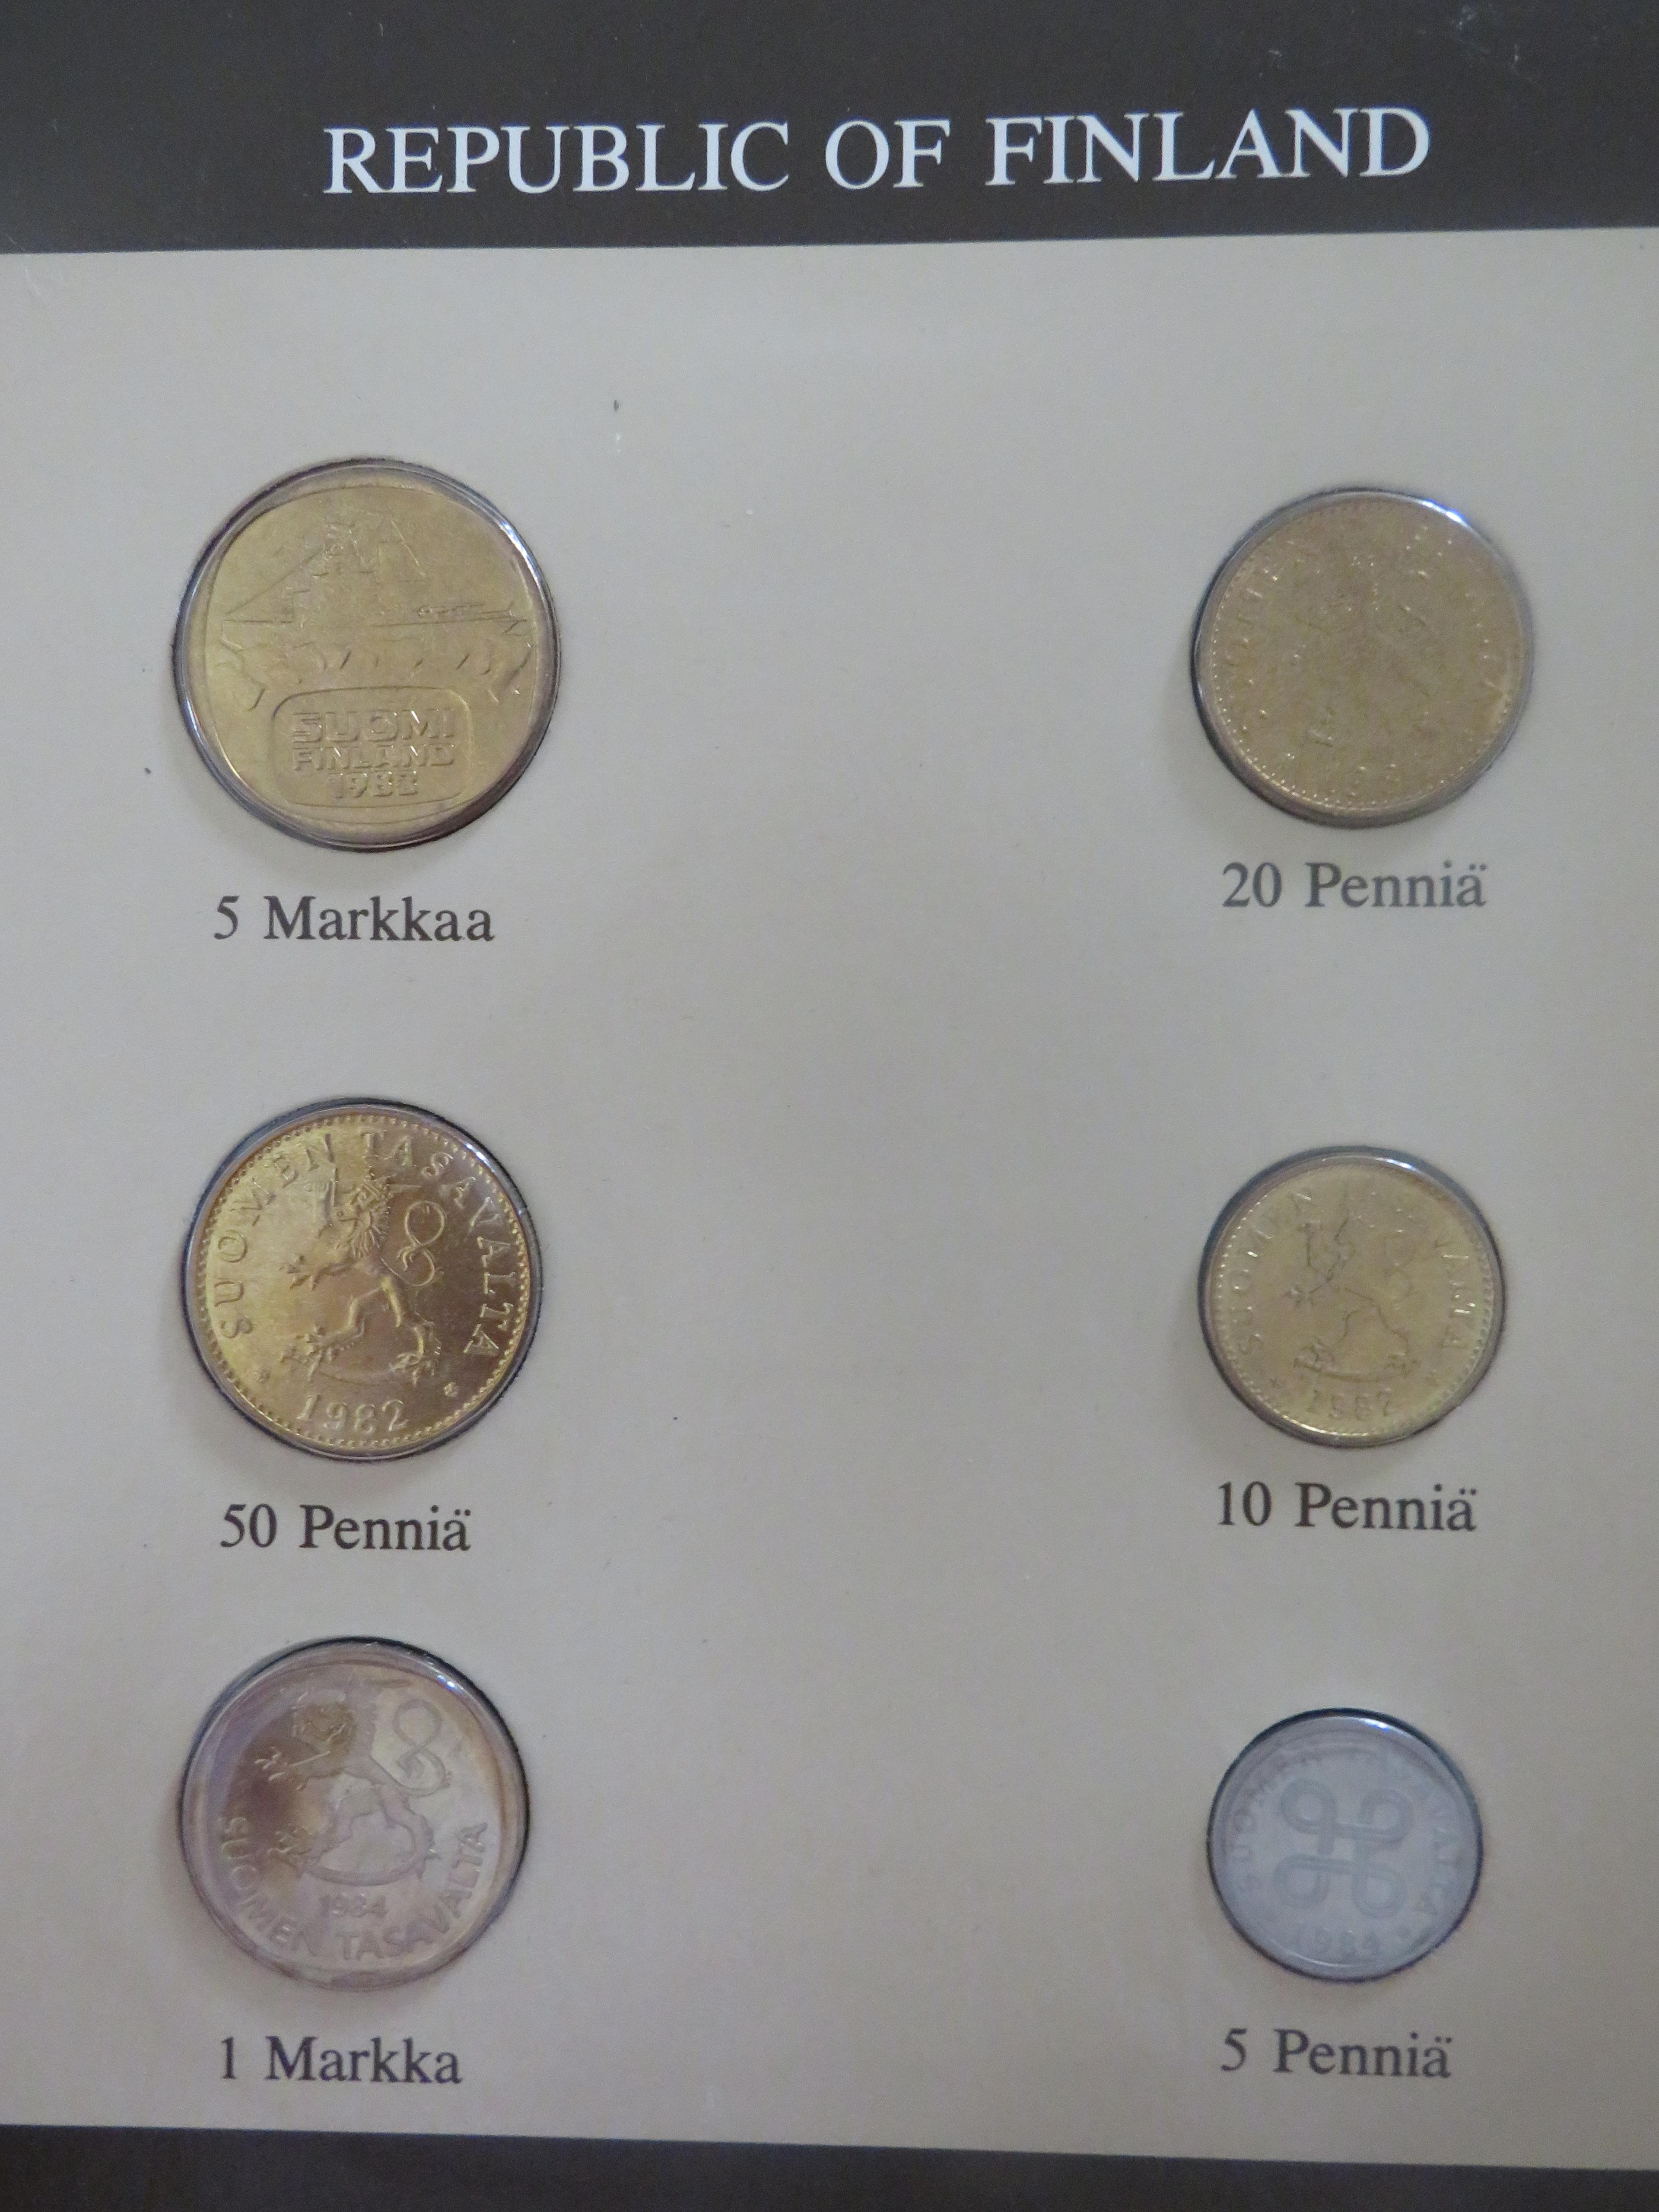 2 Pages Forgien Coin Sets